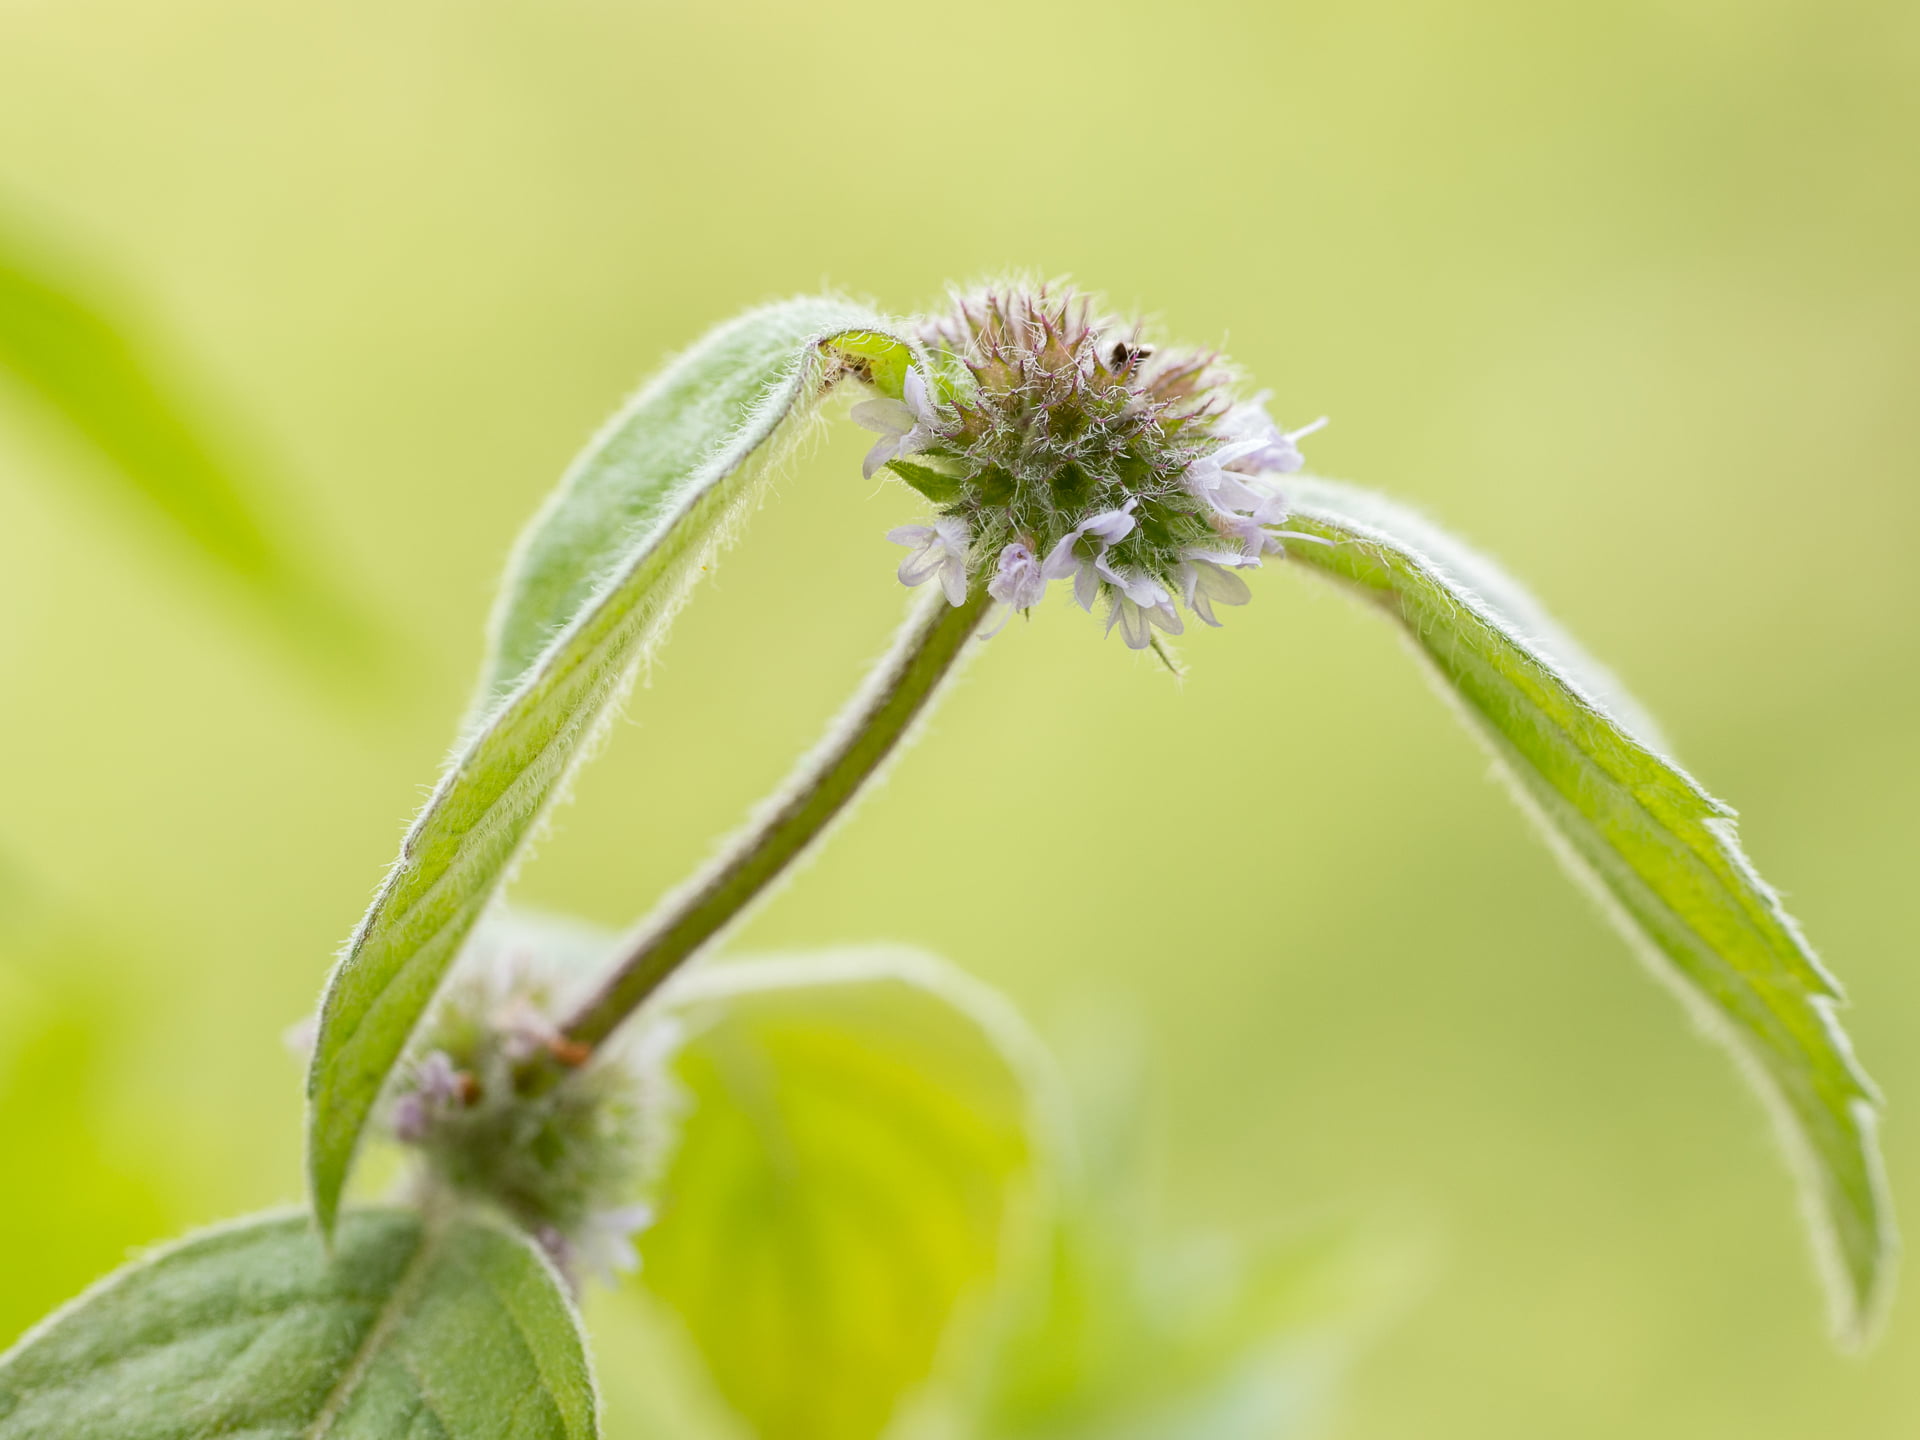 green leaf plant with white flower, Peppermint, Blume, Panasonic Lumix G5